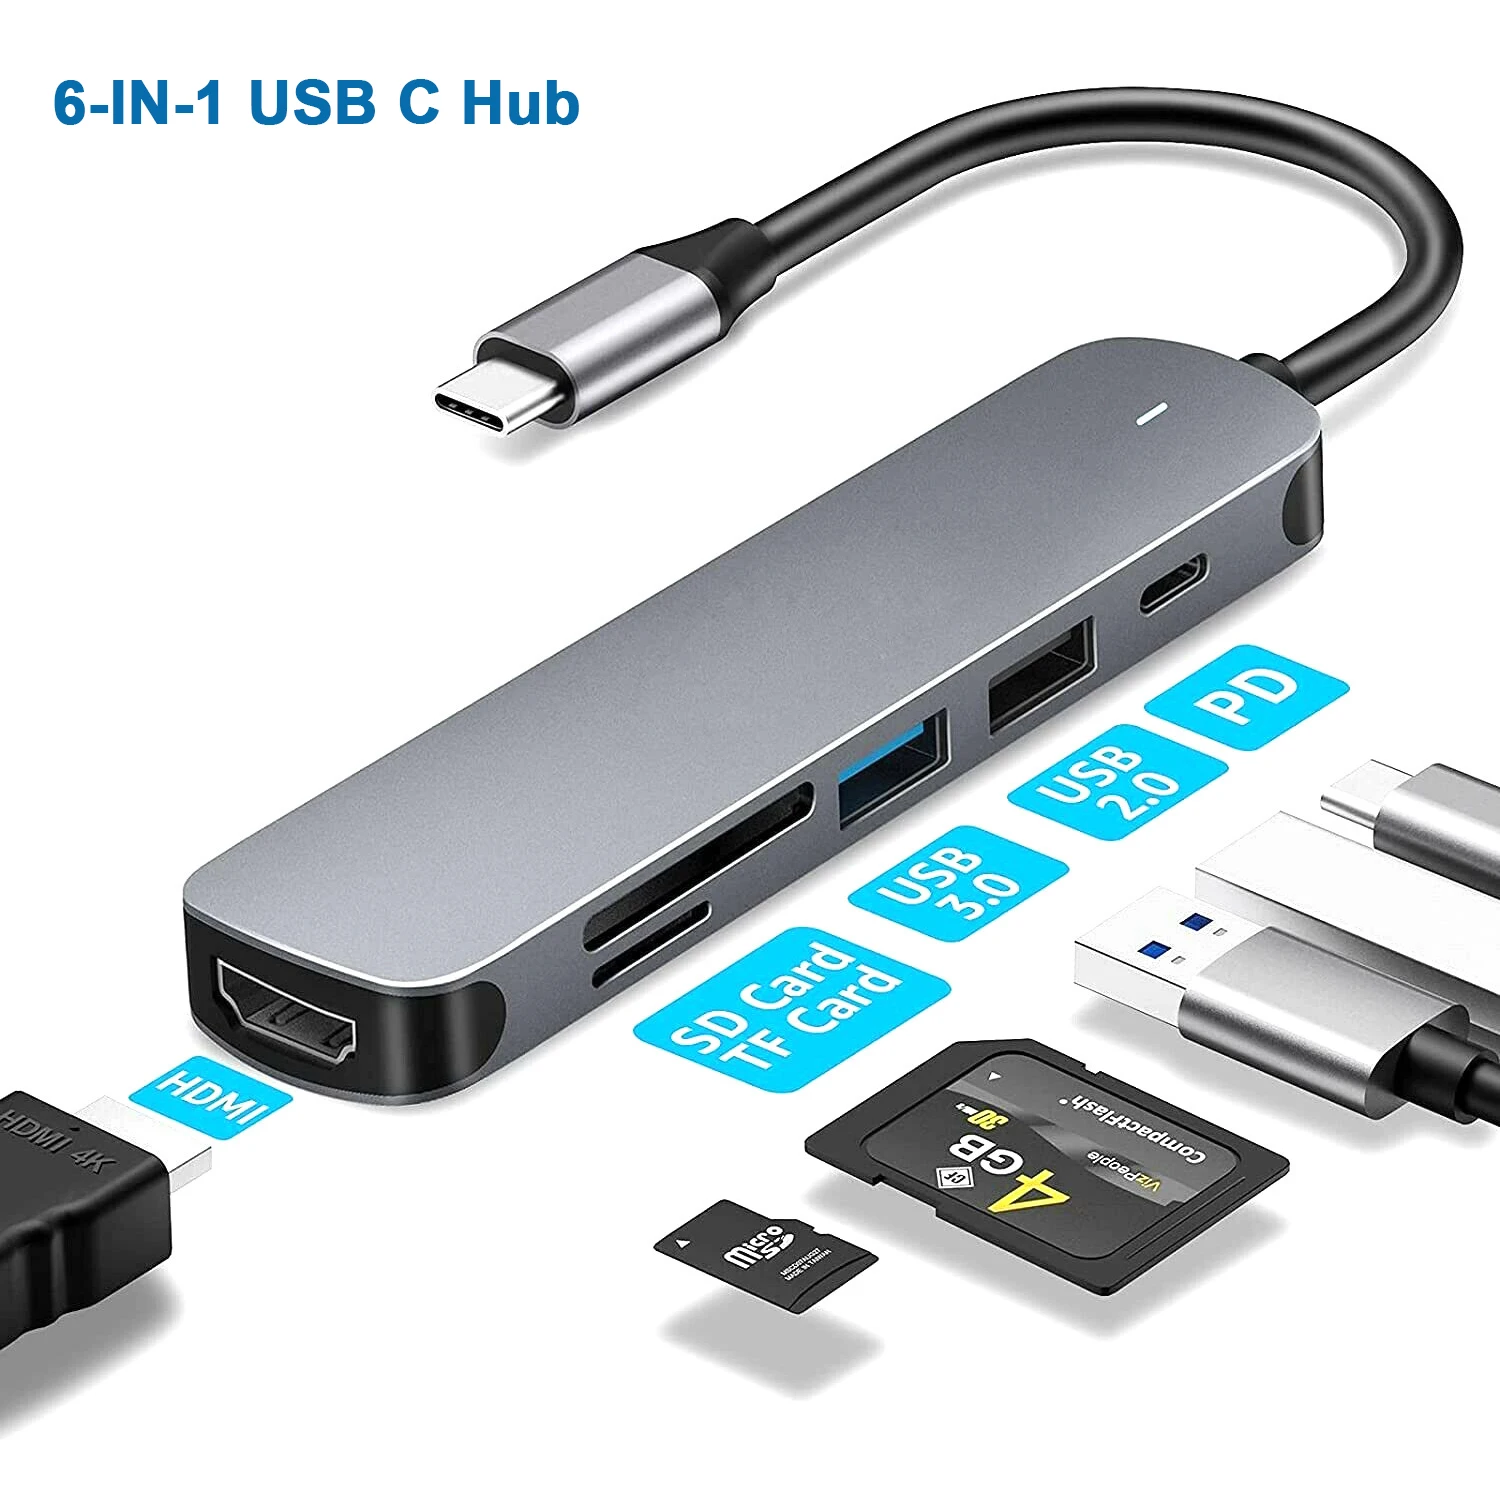 USB C Hub for IPad MacBook Air Pro Adapter 100W PD Dongle USB C To HDMI with USB 3.0 SD/TF Card Reader Thunderbolt 3 Type C Hub